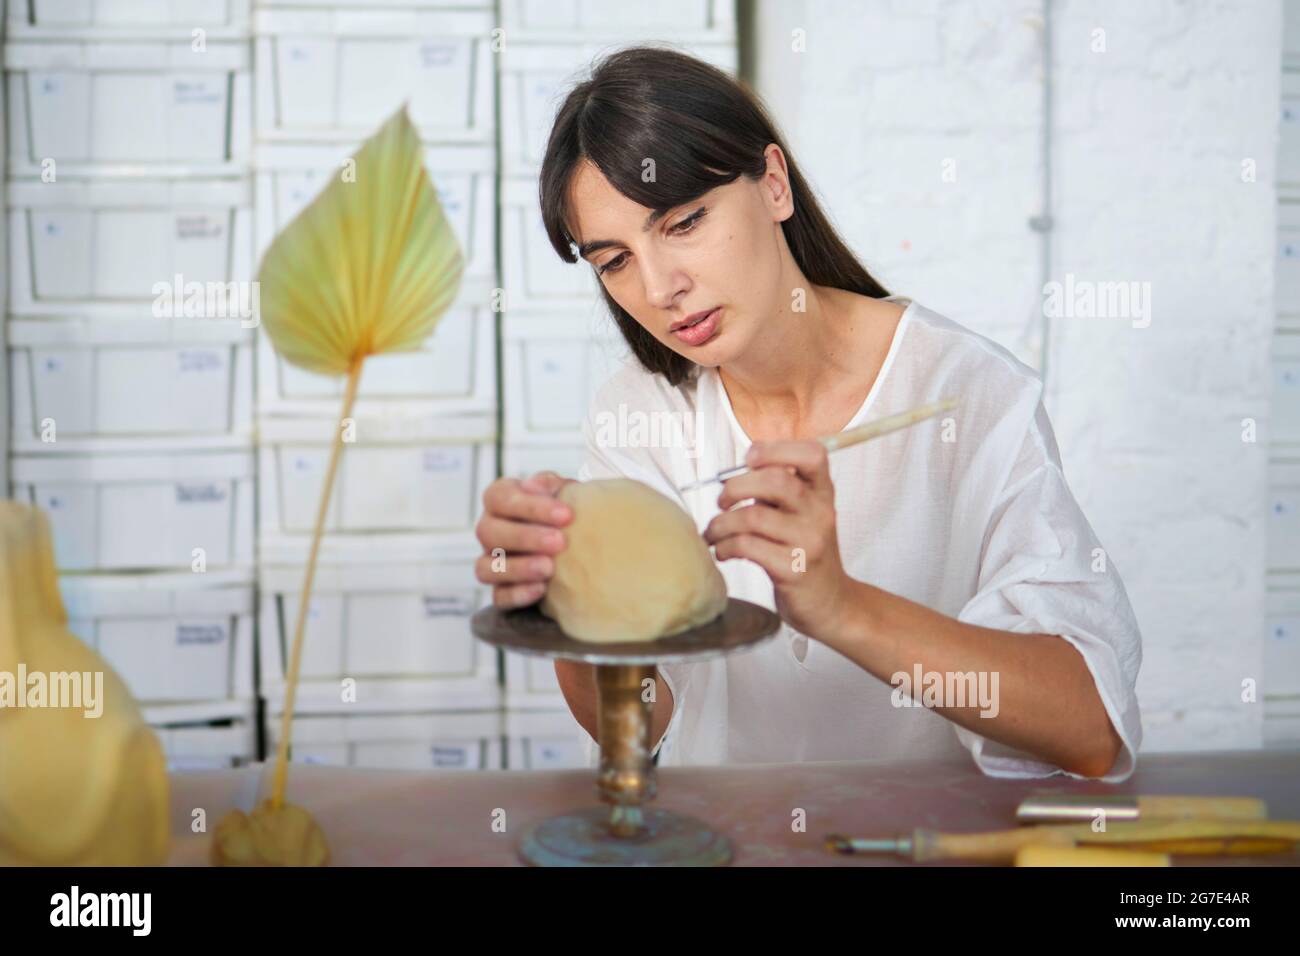 An artist working with pottery during her pottery class Stock Photo